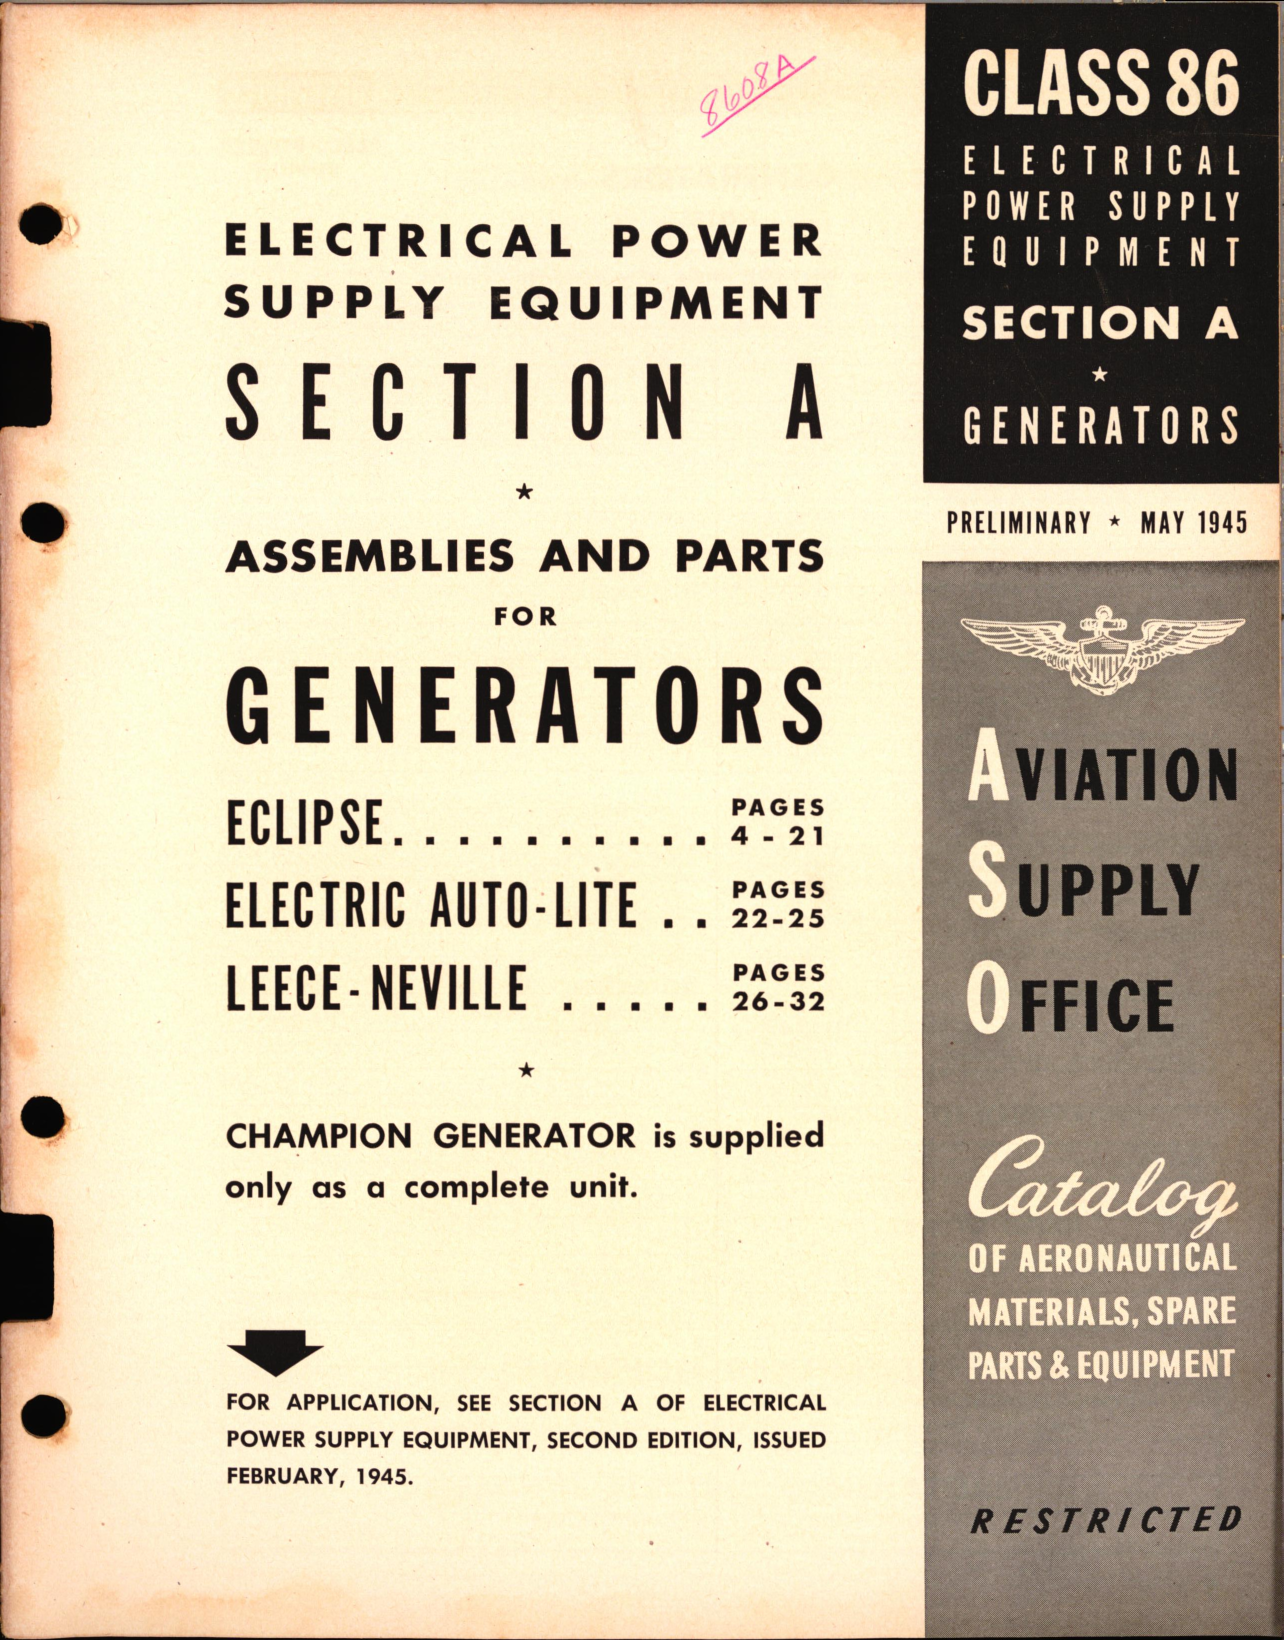 Sample page 1 from AirCorps Library document: Electrical Power Supply Equipment Section A Generators